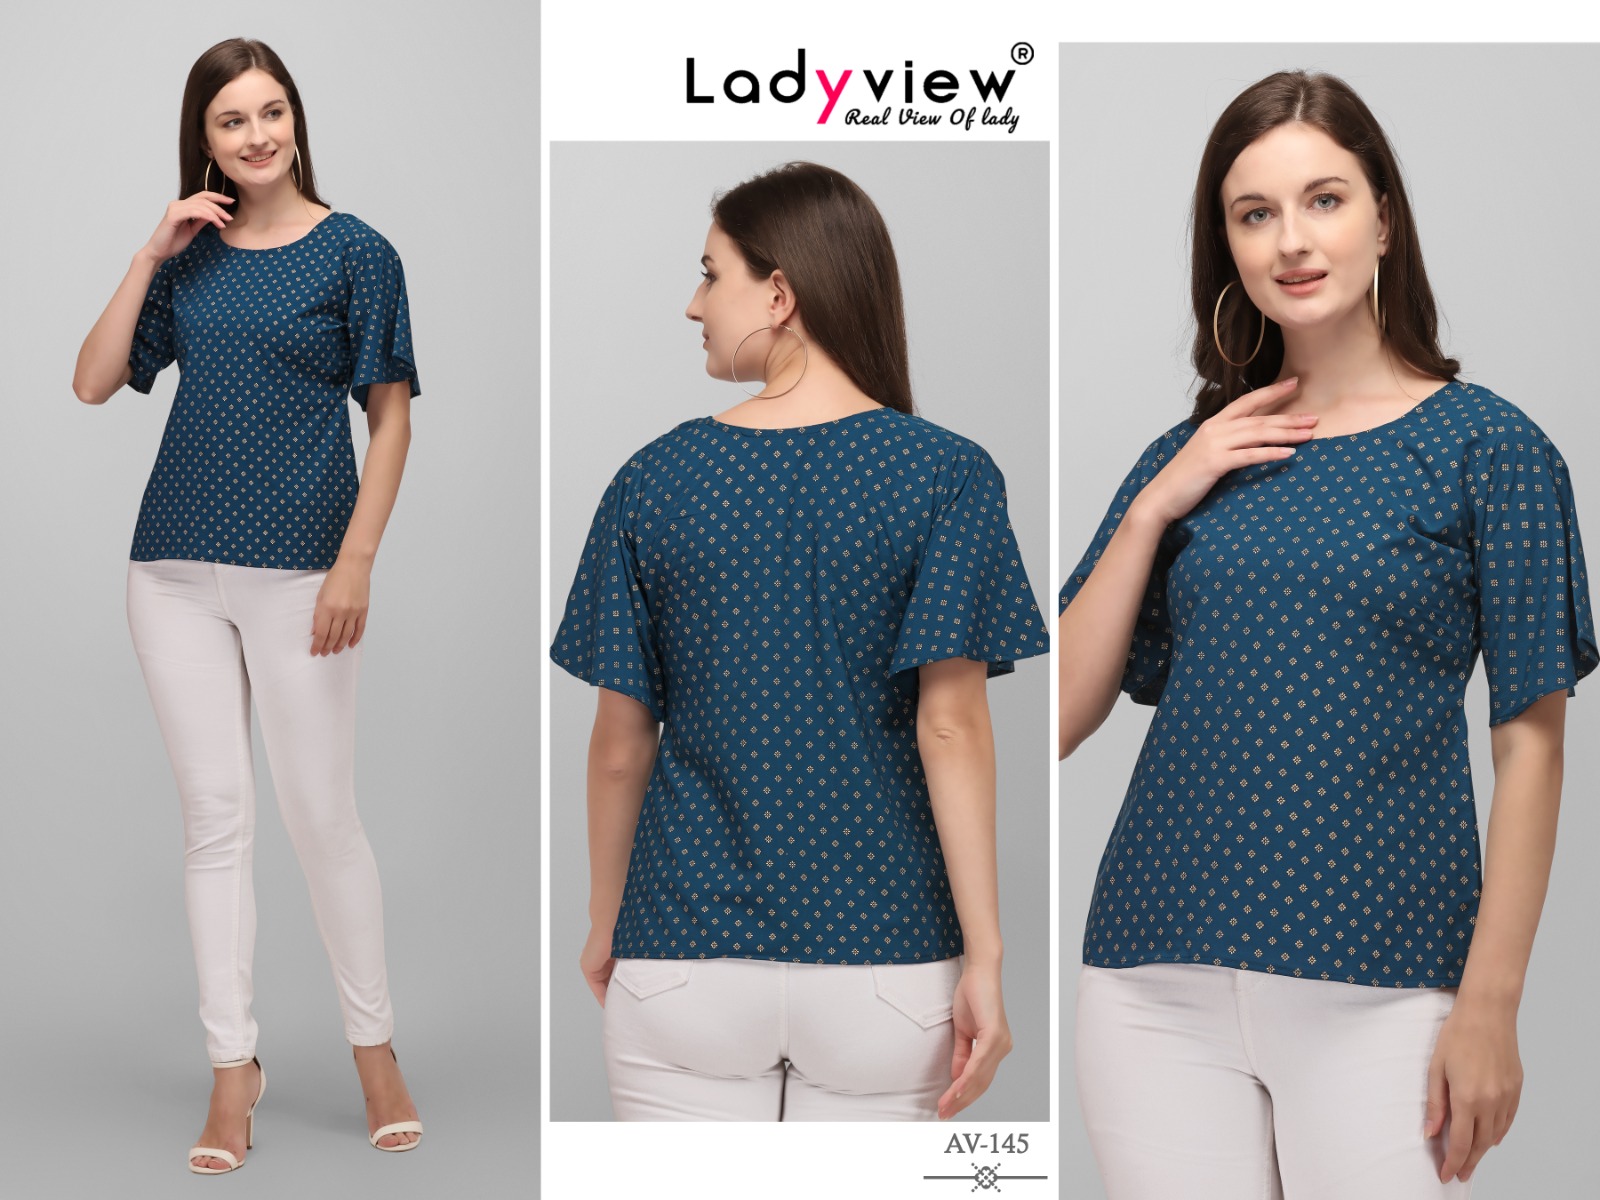 ladyview goldy Heavy Crepe with Foil Print innovative look tops catalog